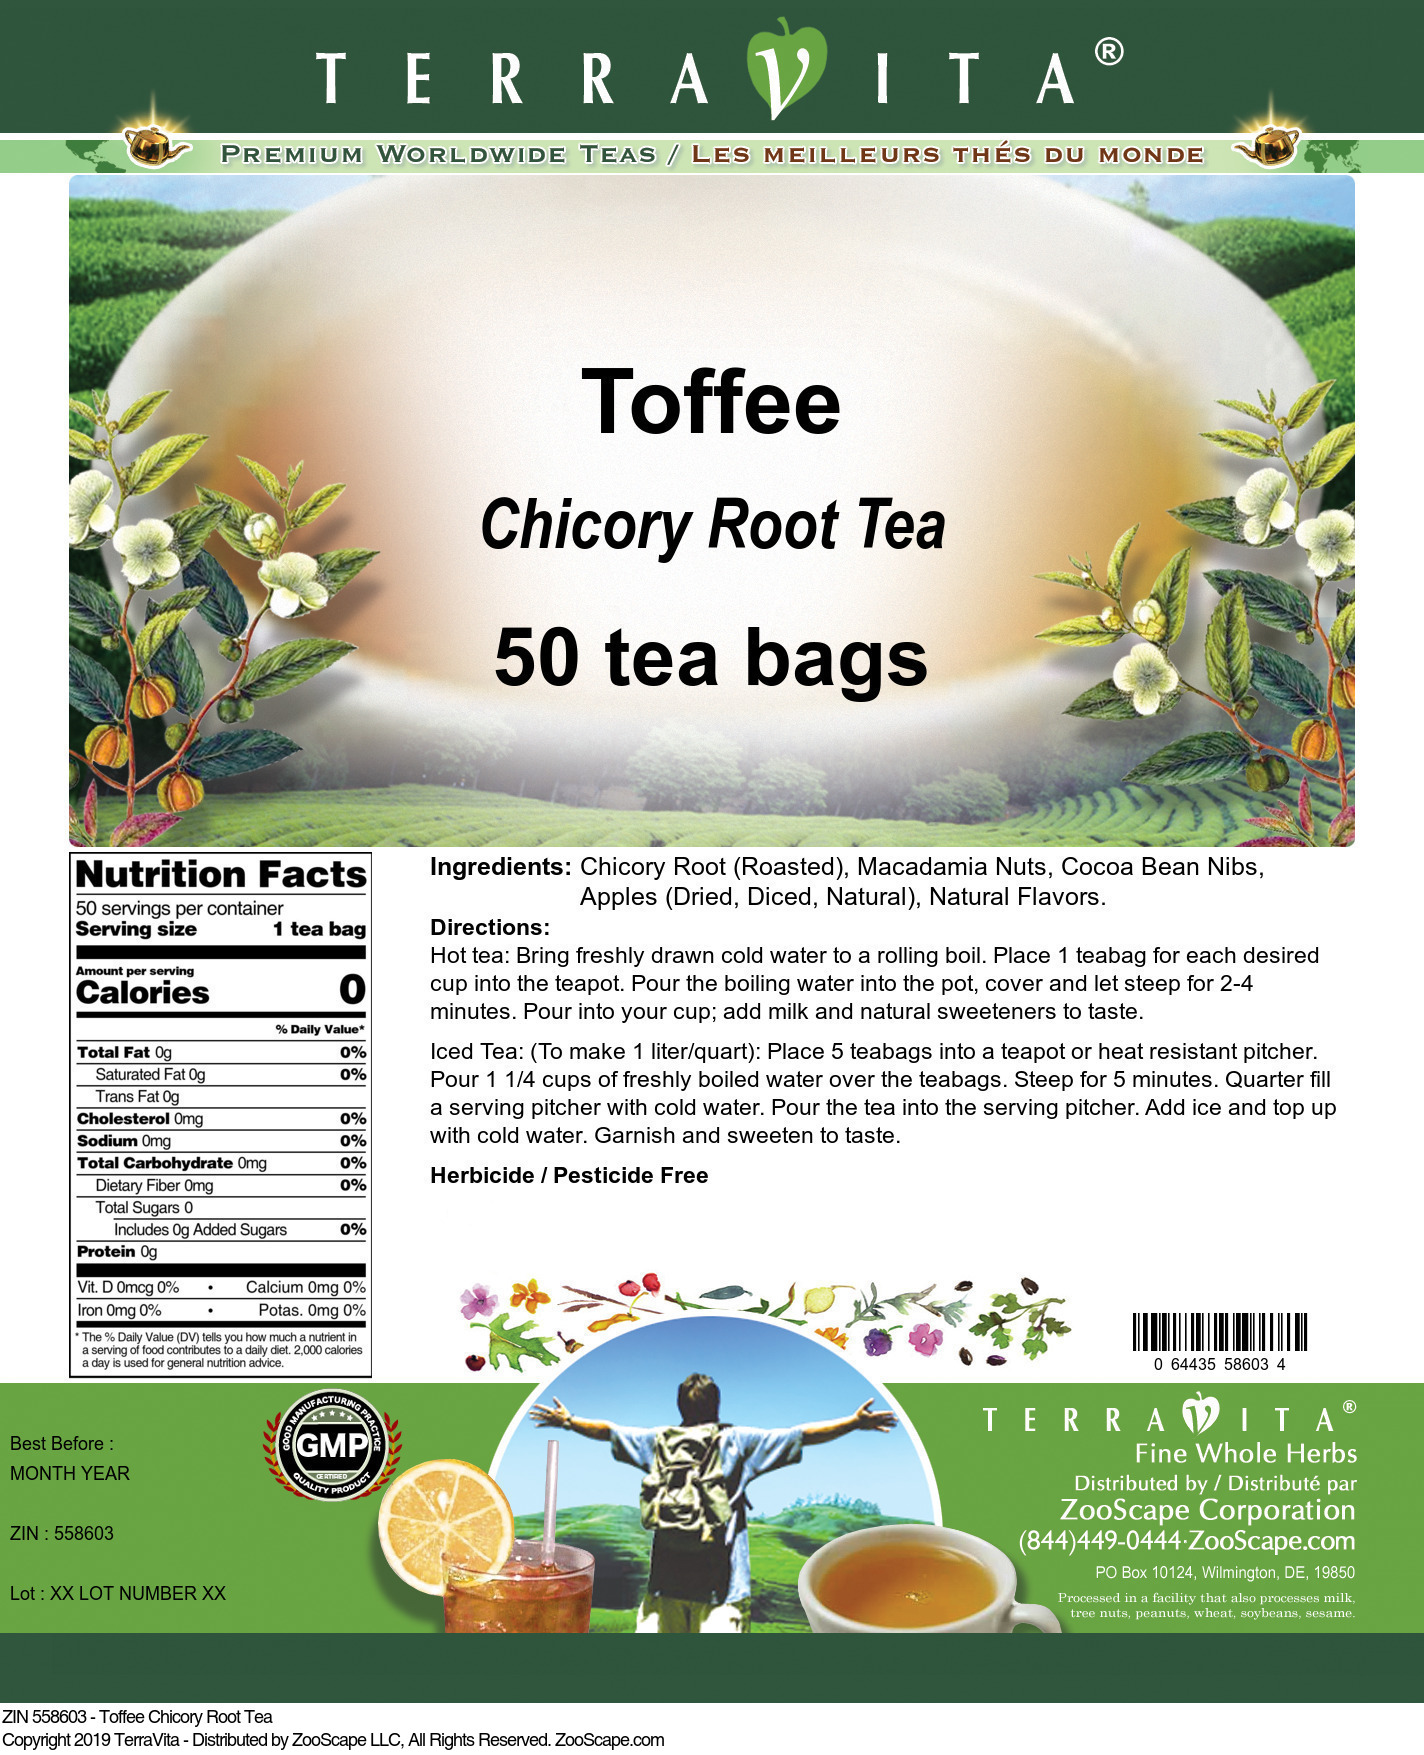 Toffee Chicory Root Tea - Label